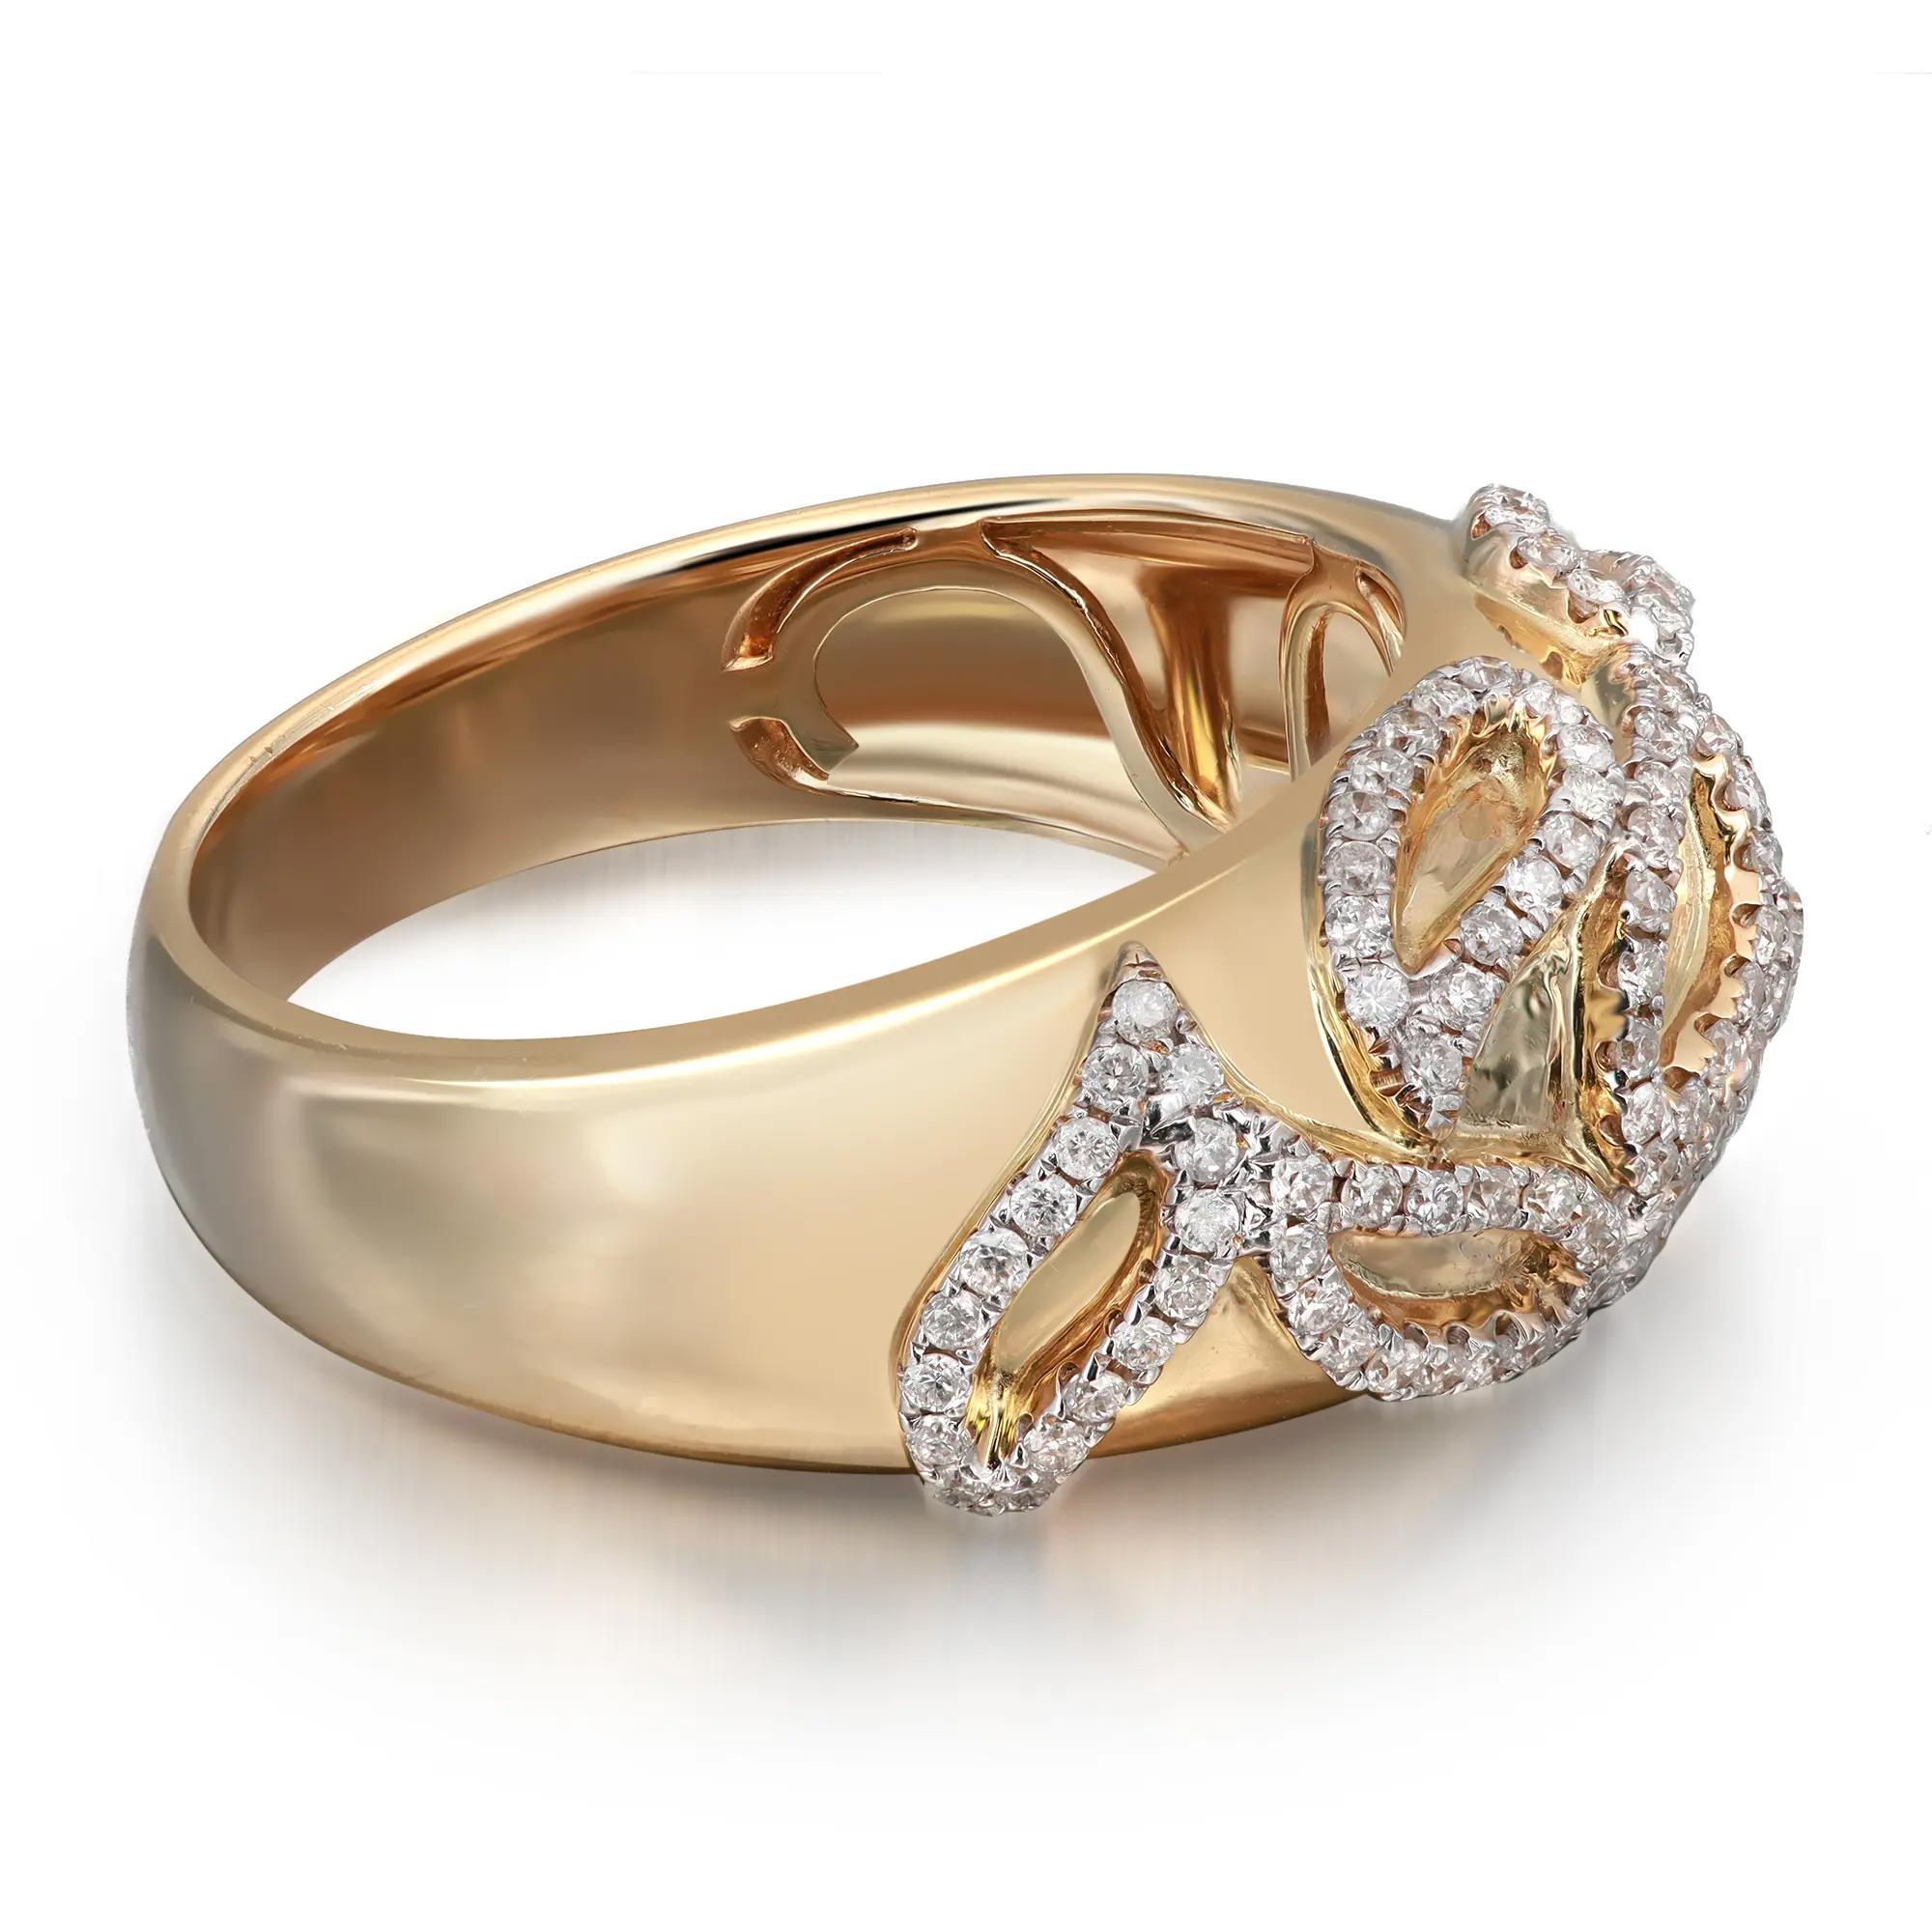 One of a kind diamond band ring rendered in highly polished 14K yellow gold. This ring features a solid yellow gold band with prong set sparkling round brilliant cut diamonds encrusted in leaf formations totaling 0.50 carat. Diamond quality: I color